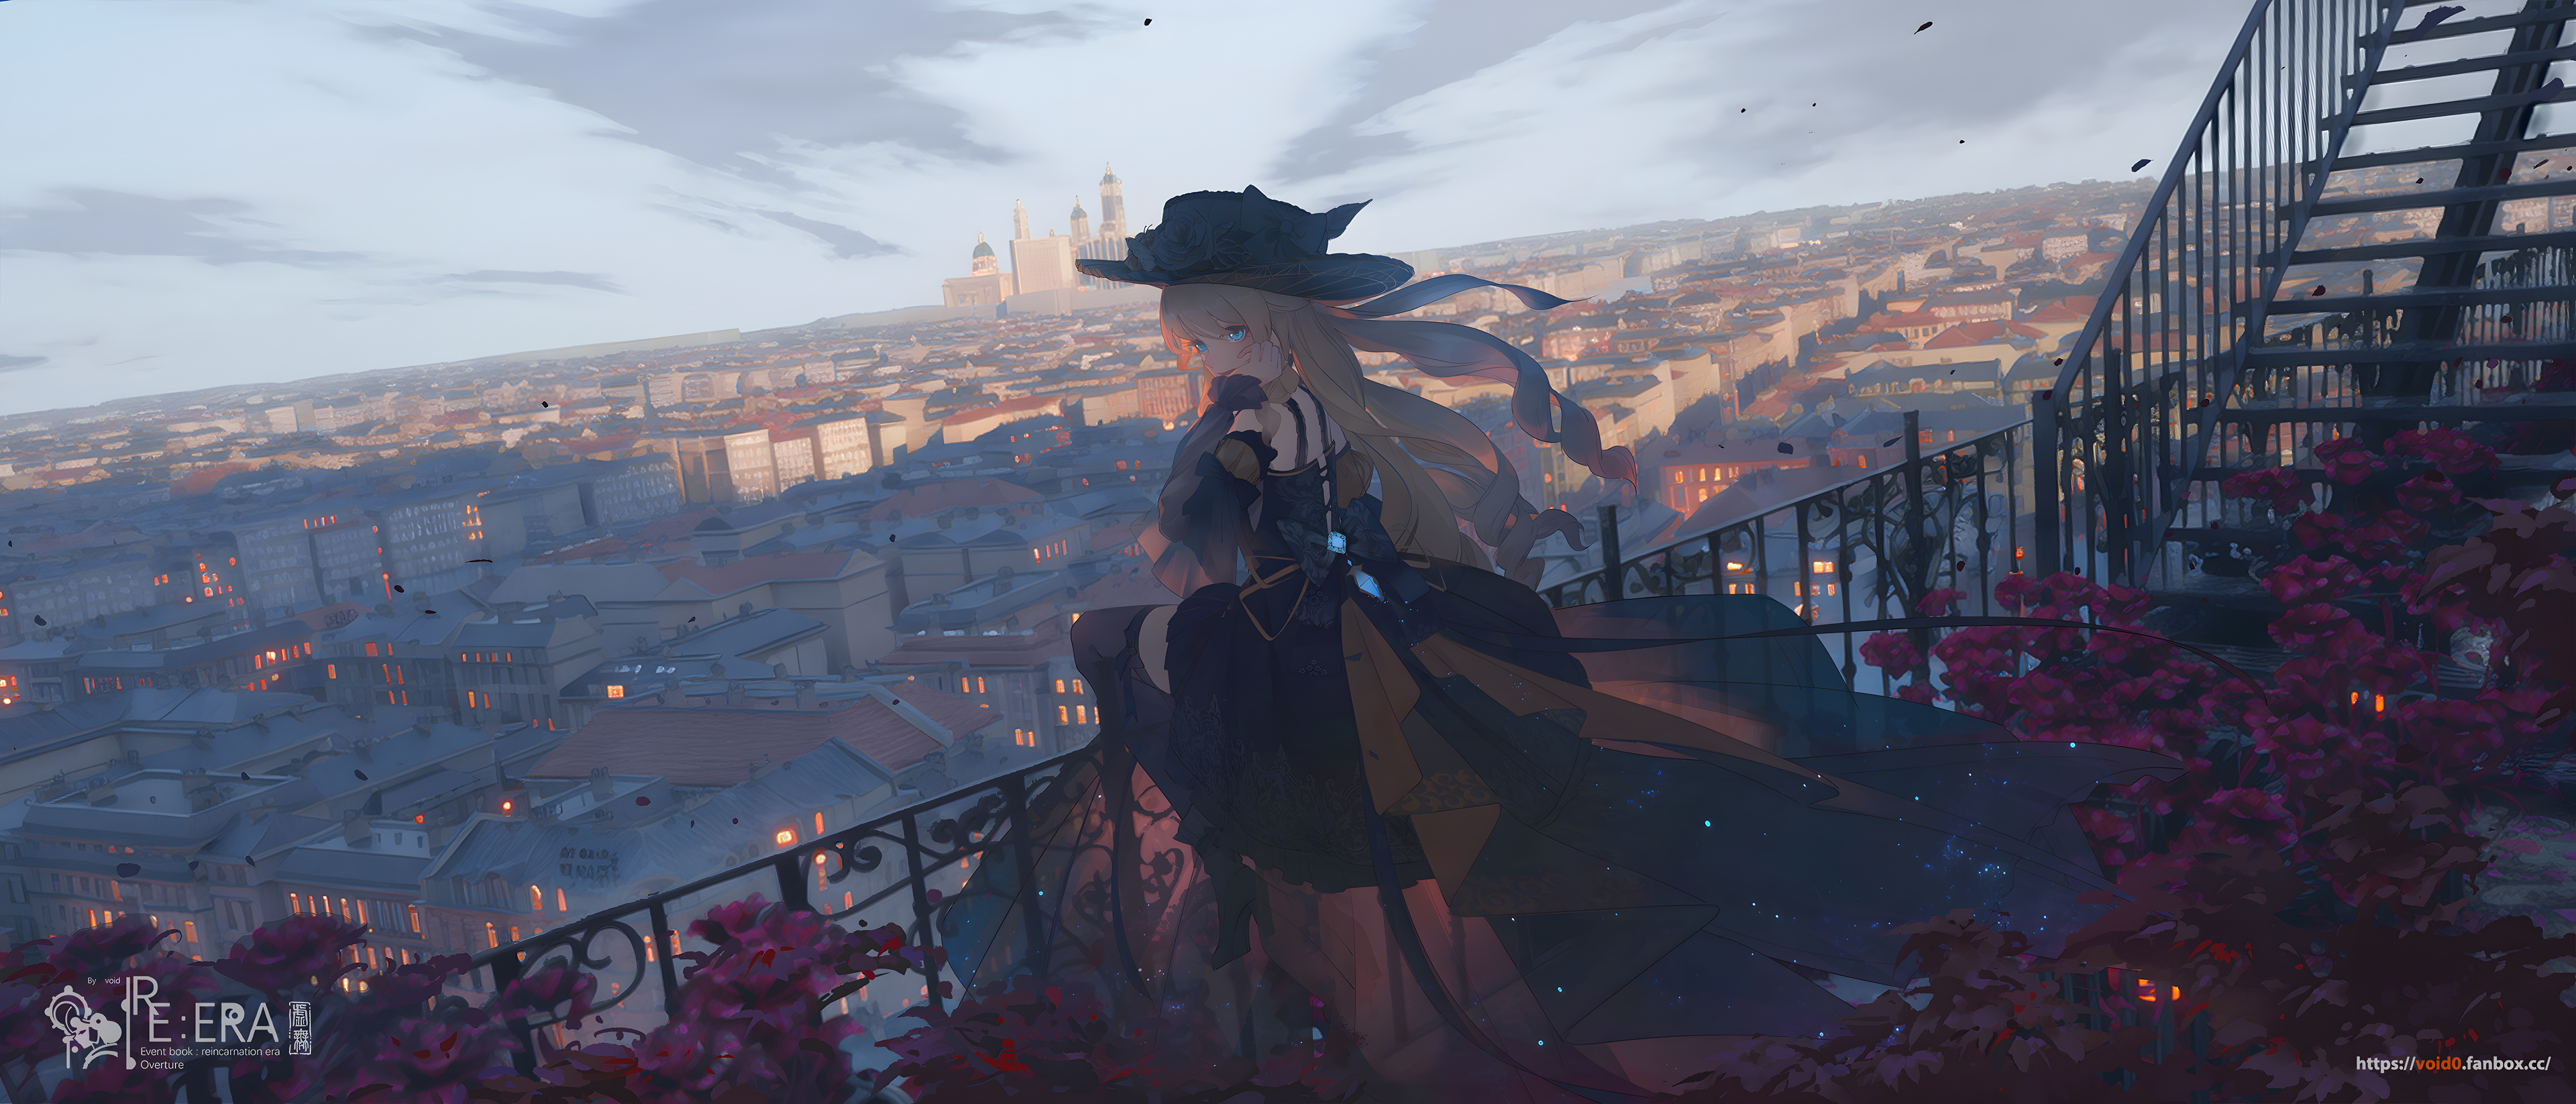 Anime 3840x1646 Genshin Impact void_0 cityscape digital art artwork dress stairs Navia (Genshin Impact) city looking over shoulder sky looking at viewer long hair anime girls stockings women with hats hat black stockings flowers watermarked clouds detached sleeves bow tie petals balcony